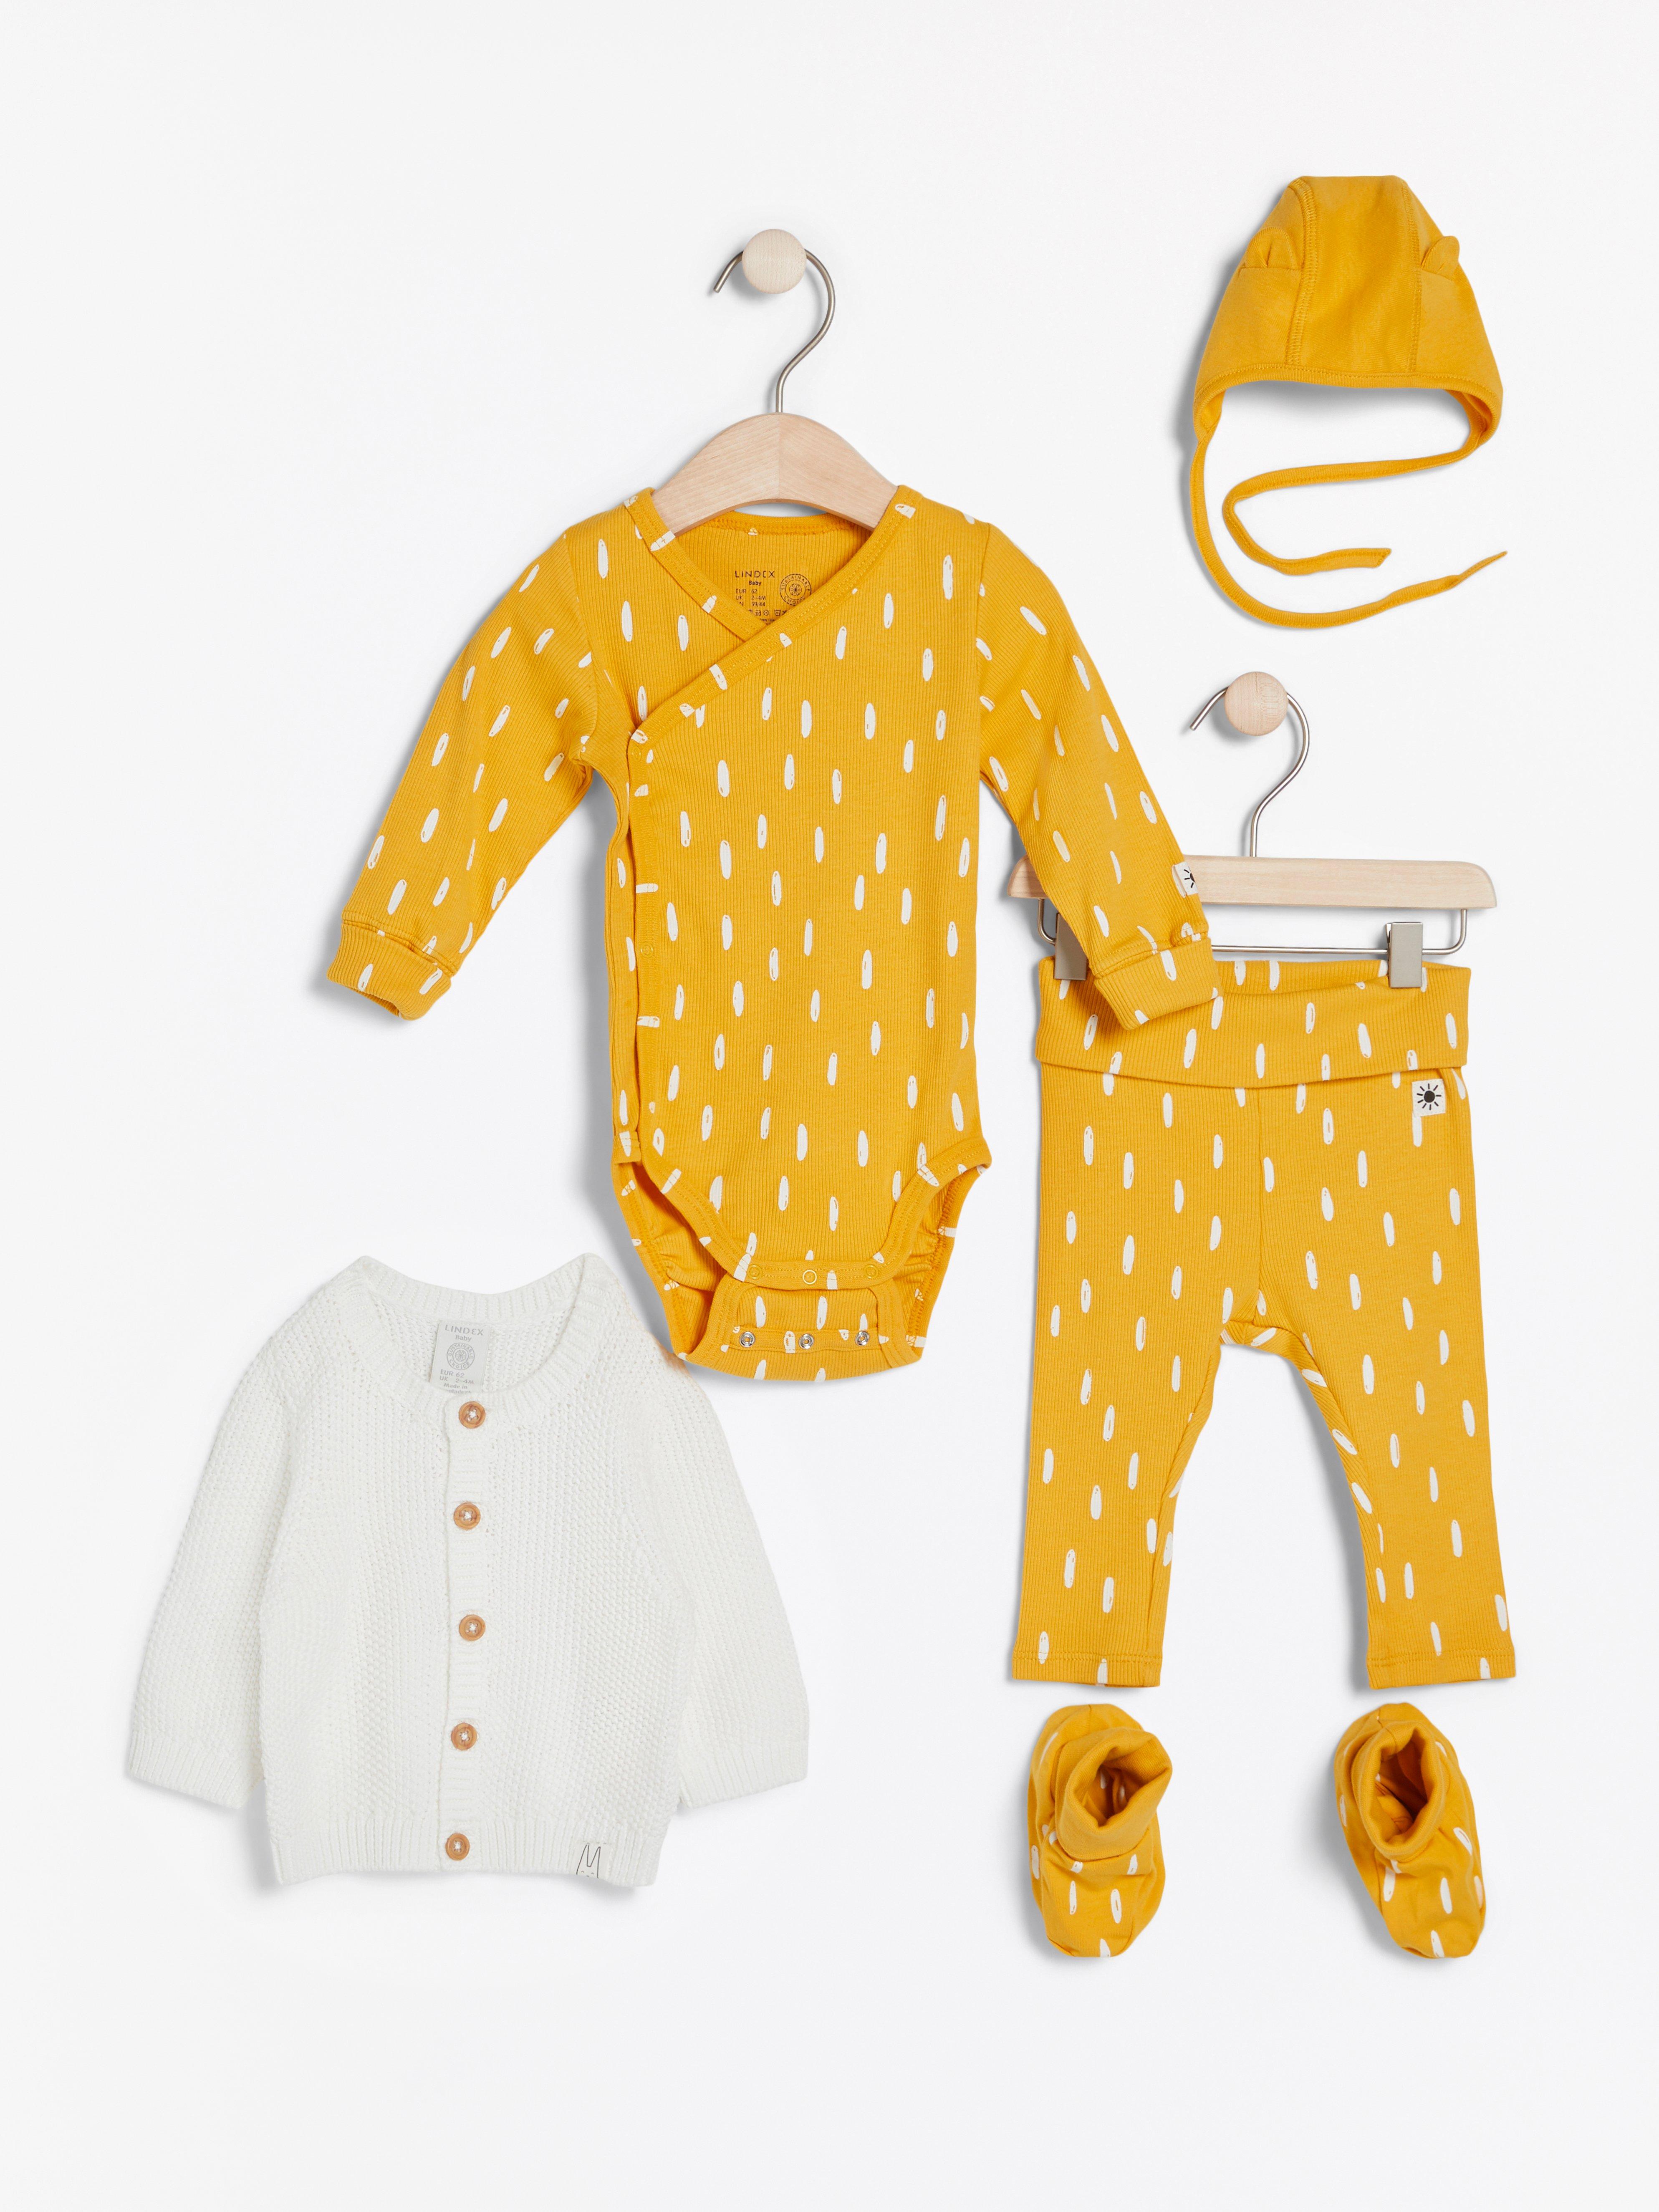 baby starter kit clothes